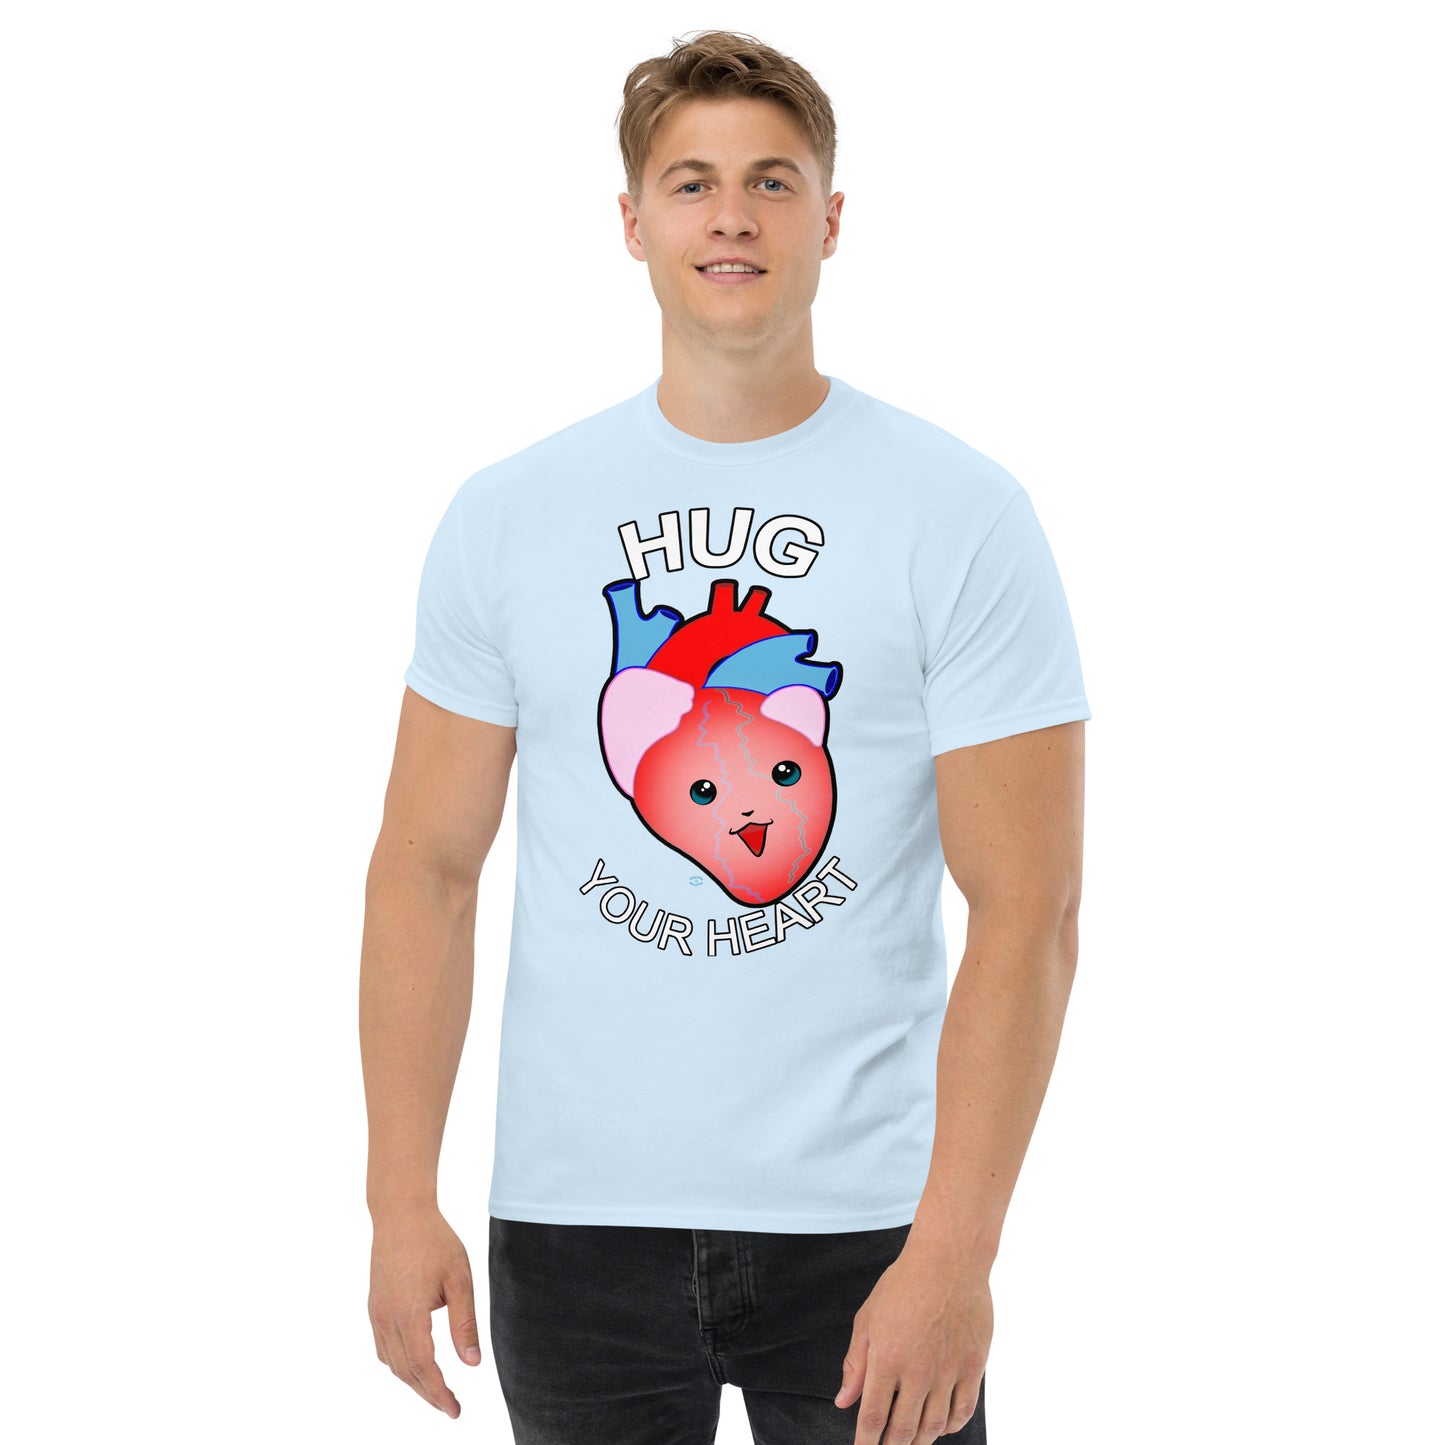 A Picture of a man wearing a short sleeved tshirt with a picture on the front of a smiling heart with the text "HUG Your Heart" - color light blue